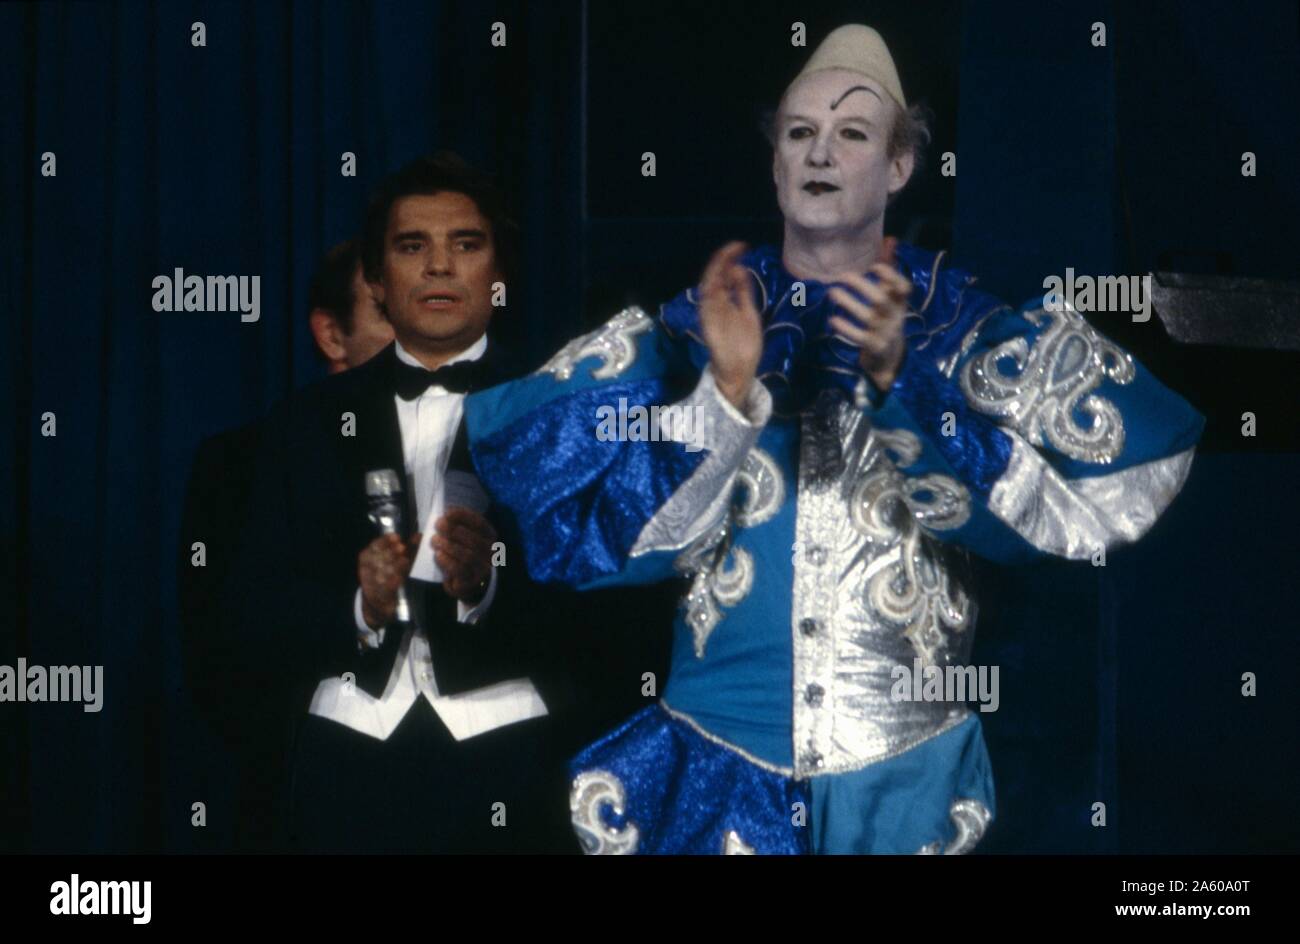 French businessman and politician Bernard Tapie presenting the Gala de la Presse at the Cirque d'Hiver Bouglione in Paris, in tribute to the association Les Tout Petits. On the right, the French journalist Ladislas de Hoyos dressed as a white clown. June 26, 1986 Stock Photo